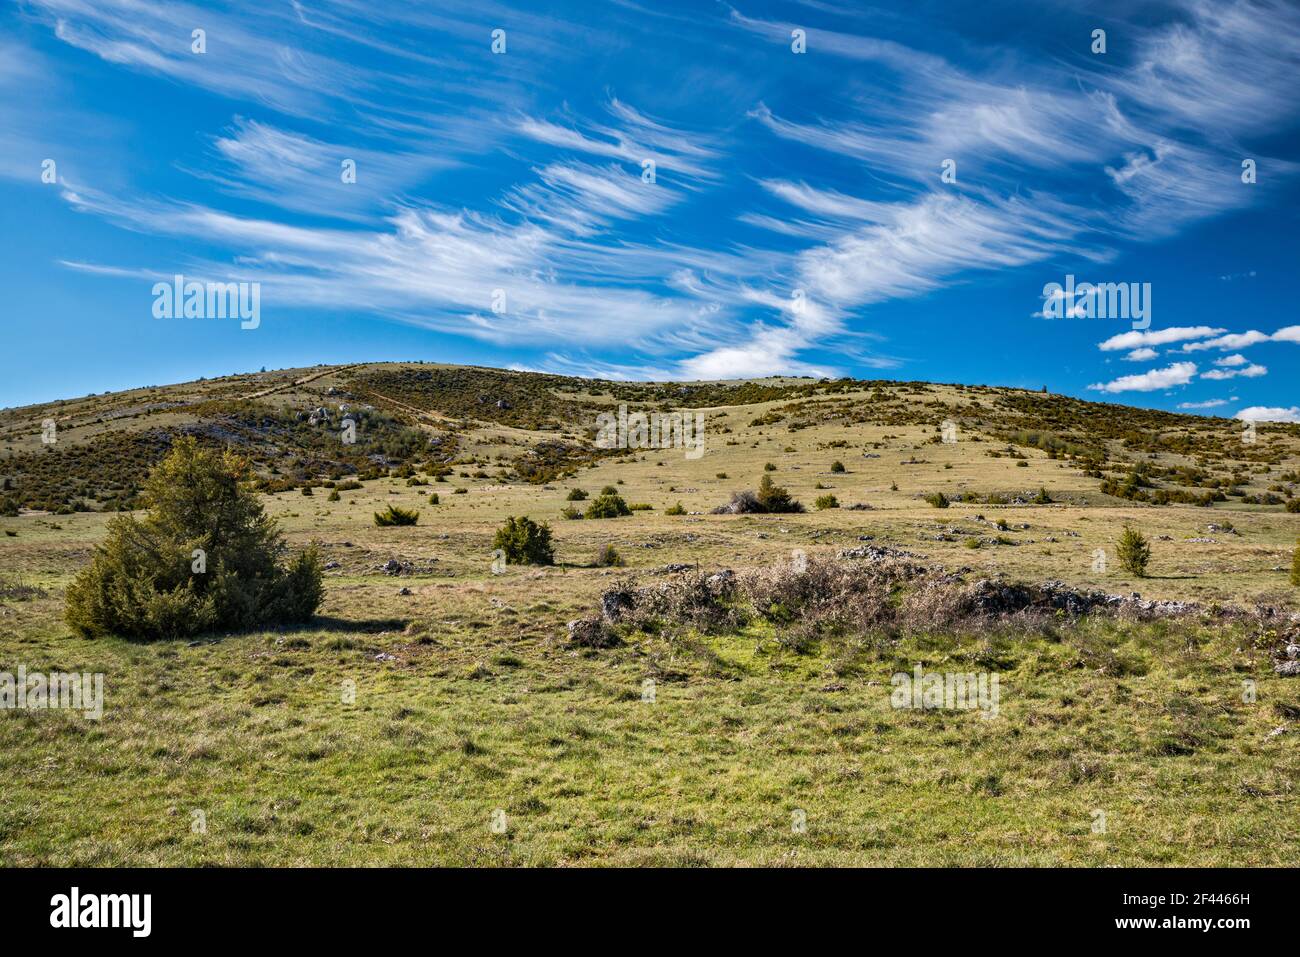 High arid causses landscape, cirrus clouds, view from road D16, at Causse Mejean plateau, Massif Central, Lozere department, Occitanie region, France Stock Photo